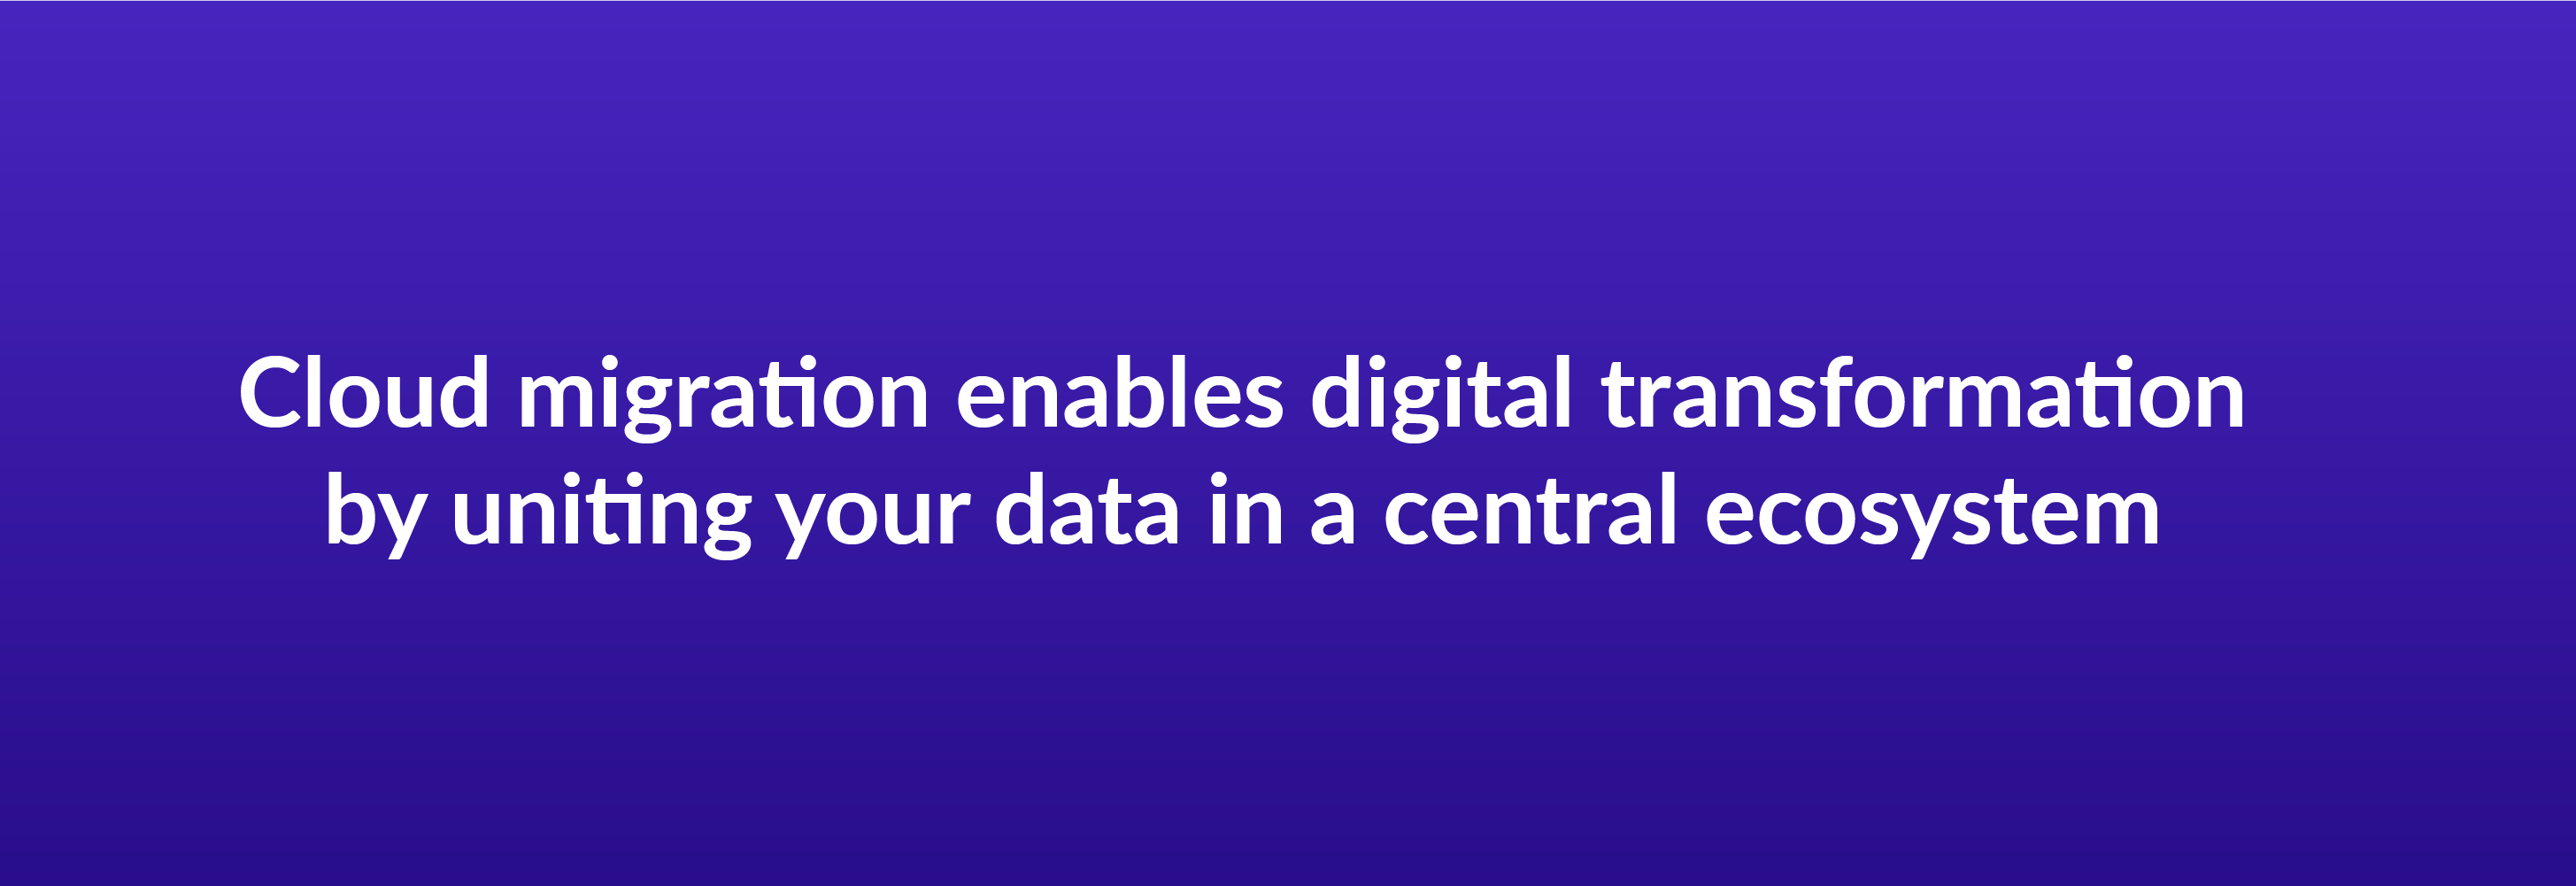 Cloud migration enables digital transformation by uniting your data in a central ecosystem